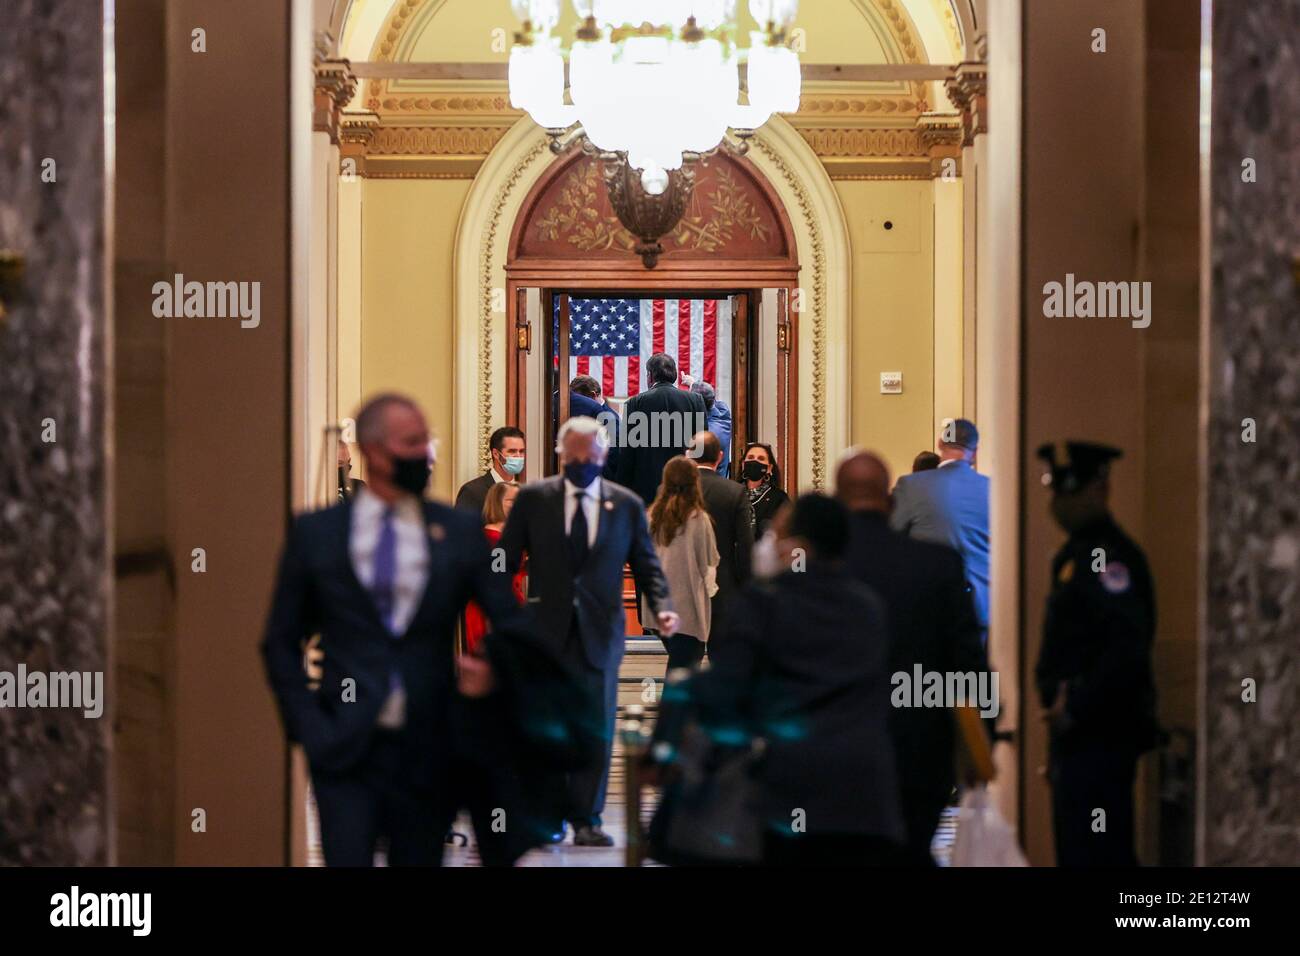 Washington, DC. 03rd Jan, 2021. Members and guests wait outside the House chamber in the US Capitol on January 03, 2021 in Washington, DC. Both chambers are holding rare Sunday sessions to open the new Congress on January 3 as the Constitution requires. Credit: Tasos Katopodis/Pool via CNP | usage worldwide Credit: dpa/Alamy Live News Stock Photo